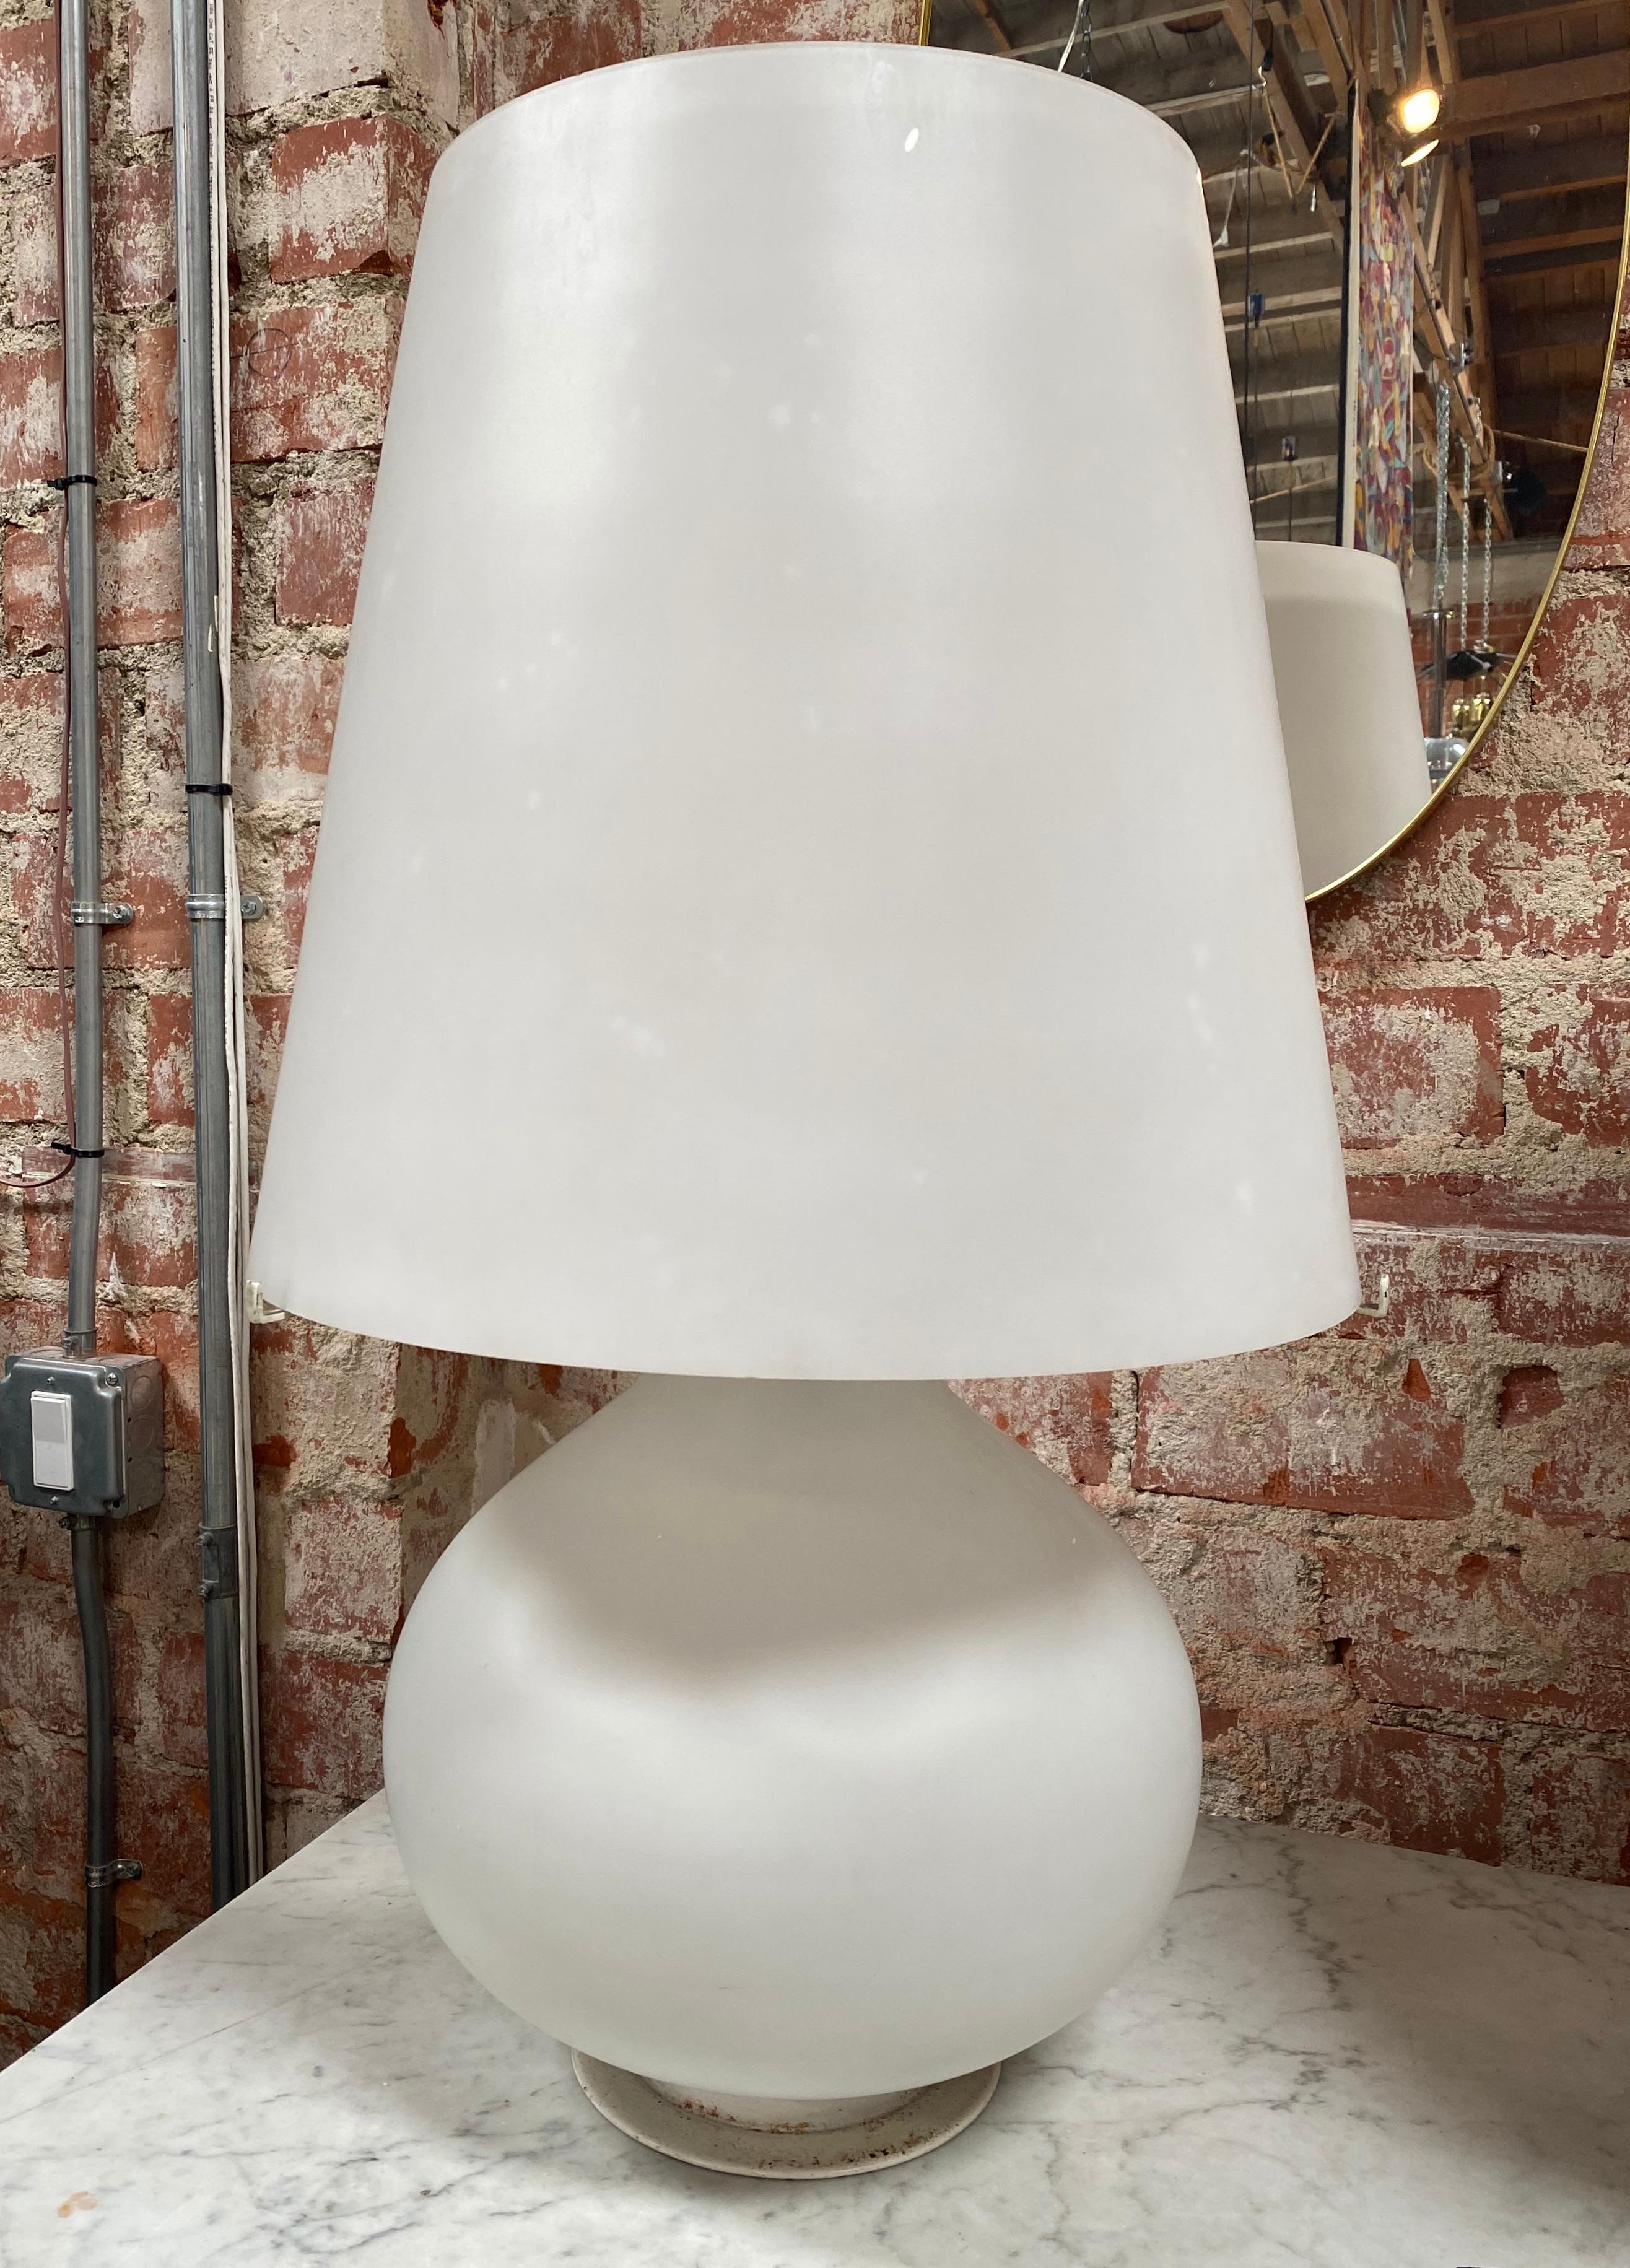 Wonderful and huge Fontana Arte table lamp, designed in 1954 by Max Ingrand and manufactured in the early 1960s in Italy.
Largest of three existing sizes The 